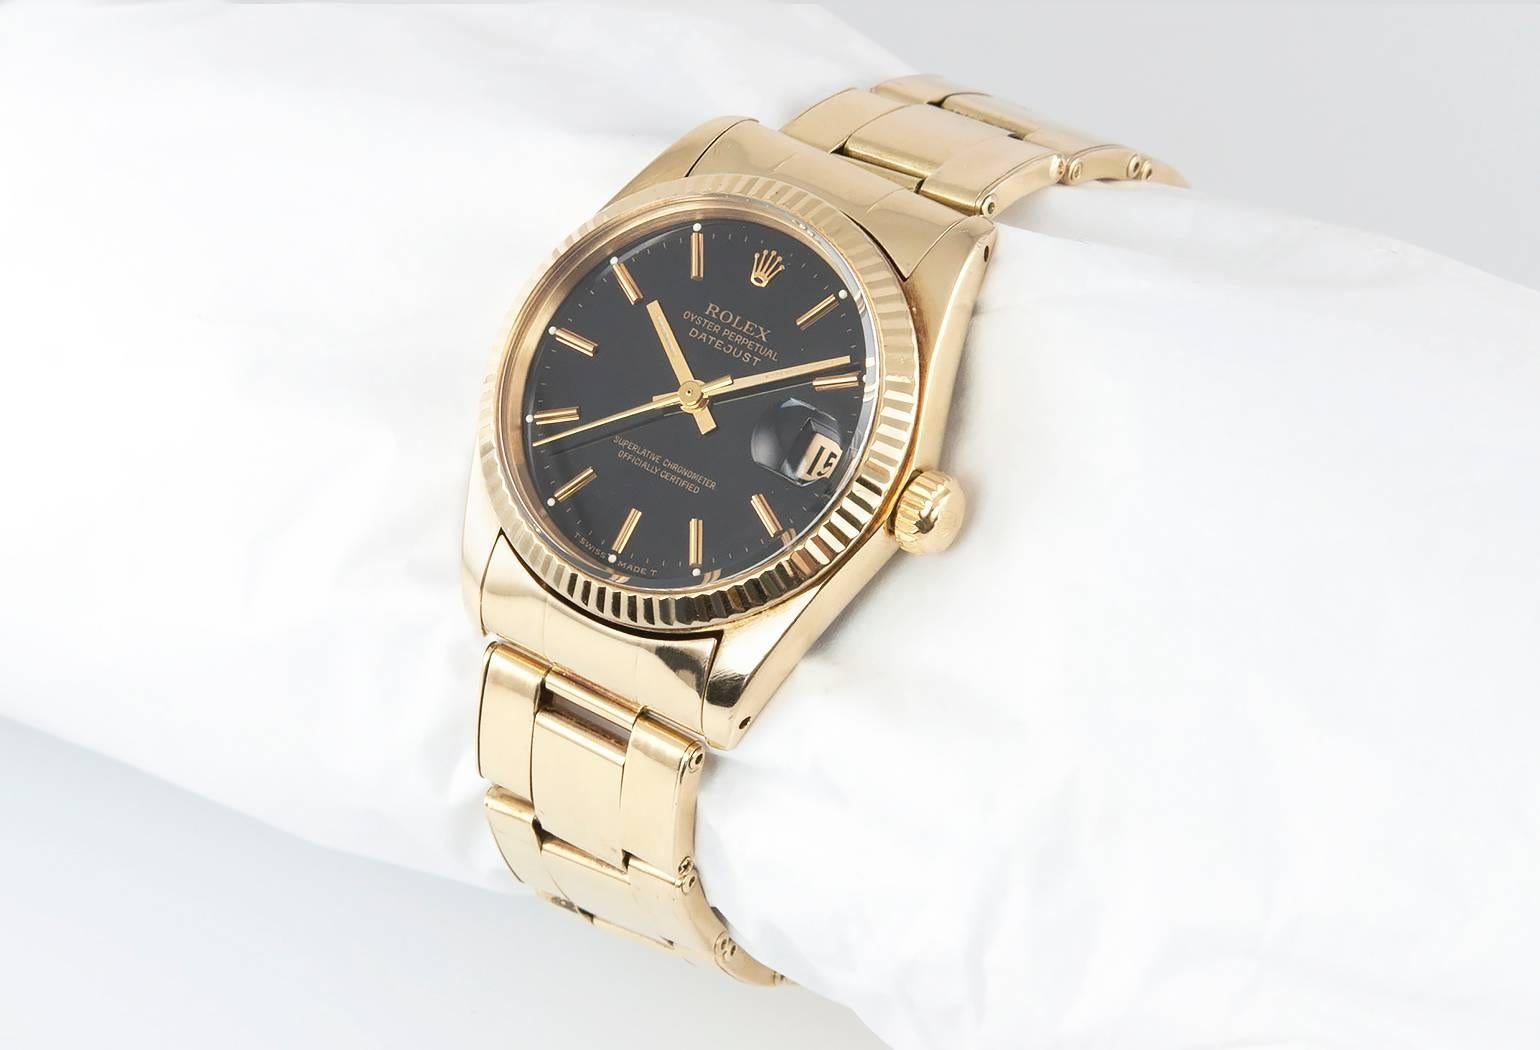 Rolex DateJust wristwatch in 14 karat yellow gold, reference 6827.  This classic Rolex features a 14 karat yellow gold case, a riveted oyster band, fluted gold bezel, a black original dial with stick markers, plastic crystal, locking waterproof